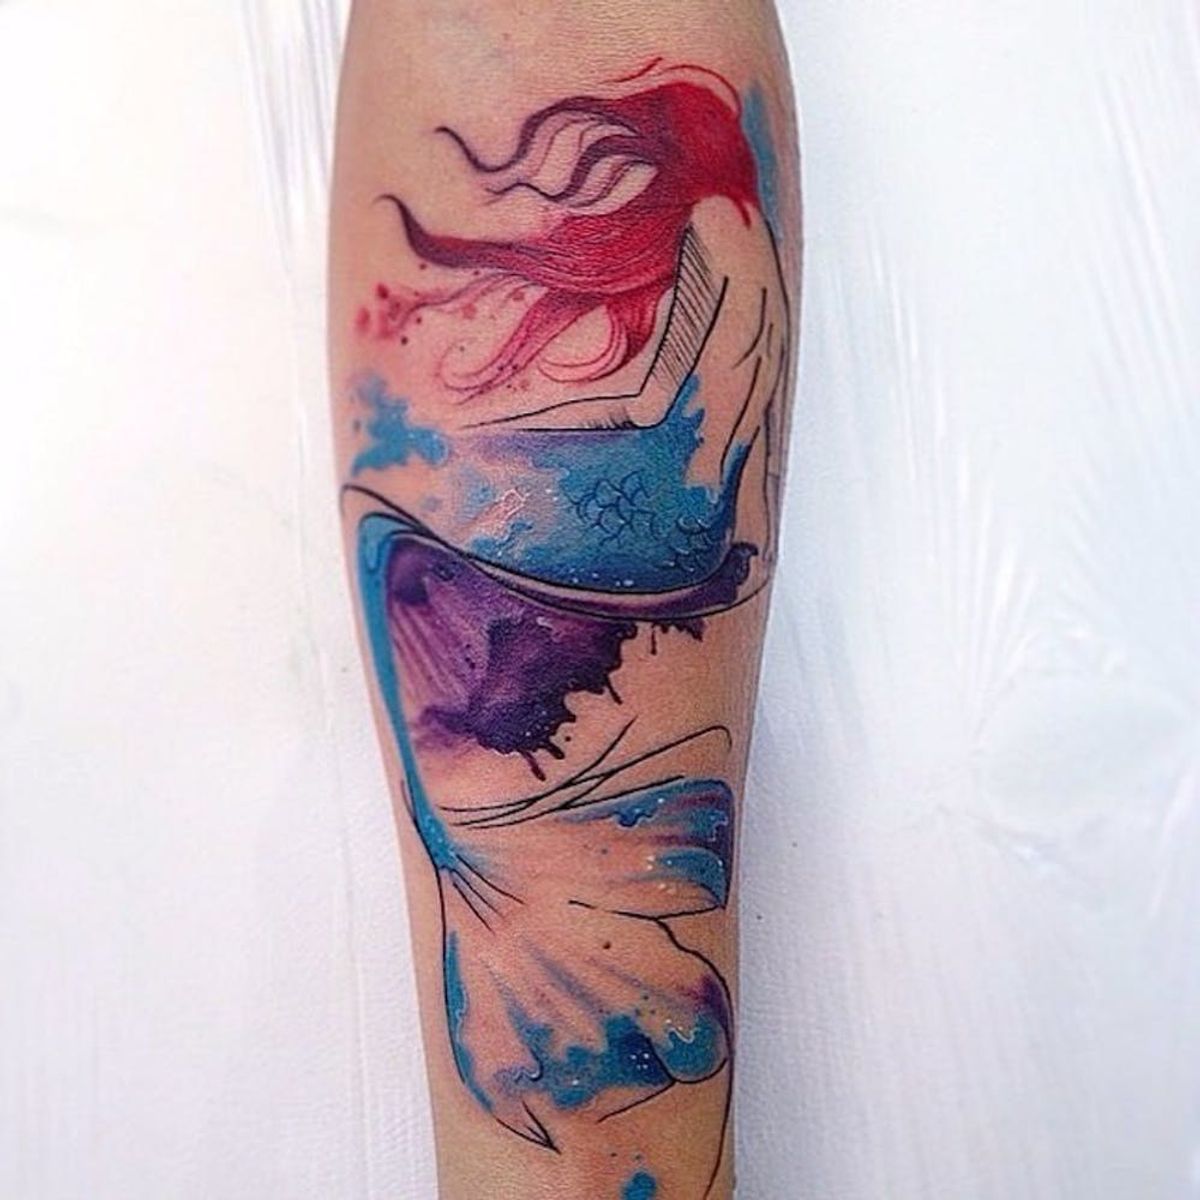 14 Ocean-Inspired Tattoos Ariel Would Totally Approve Of